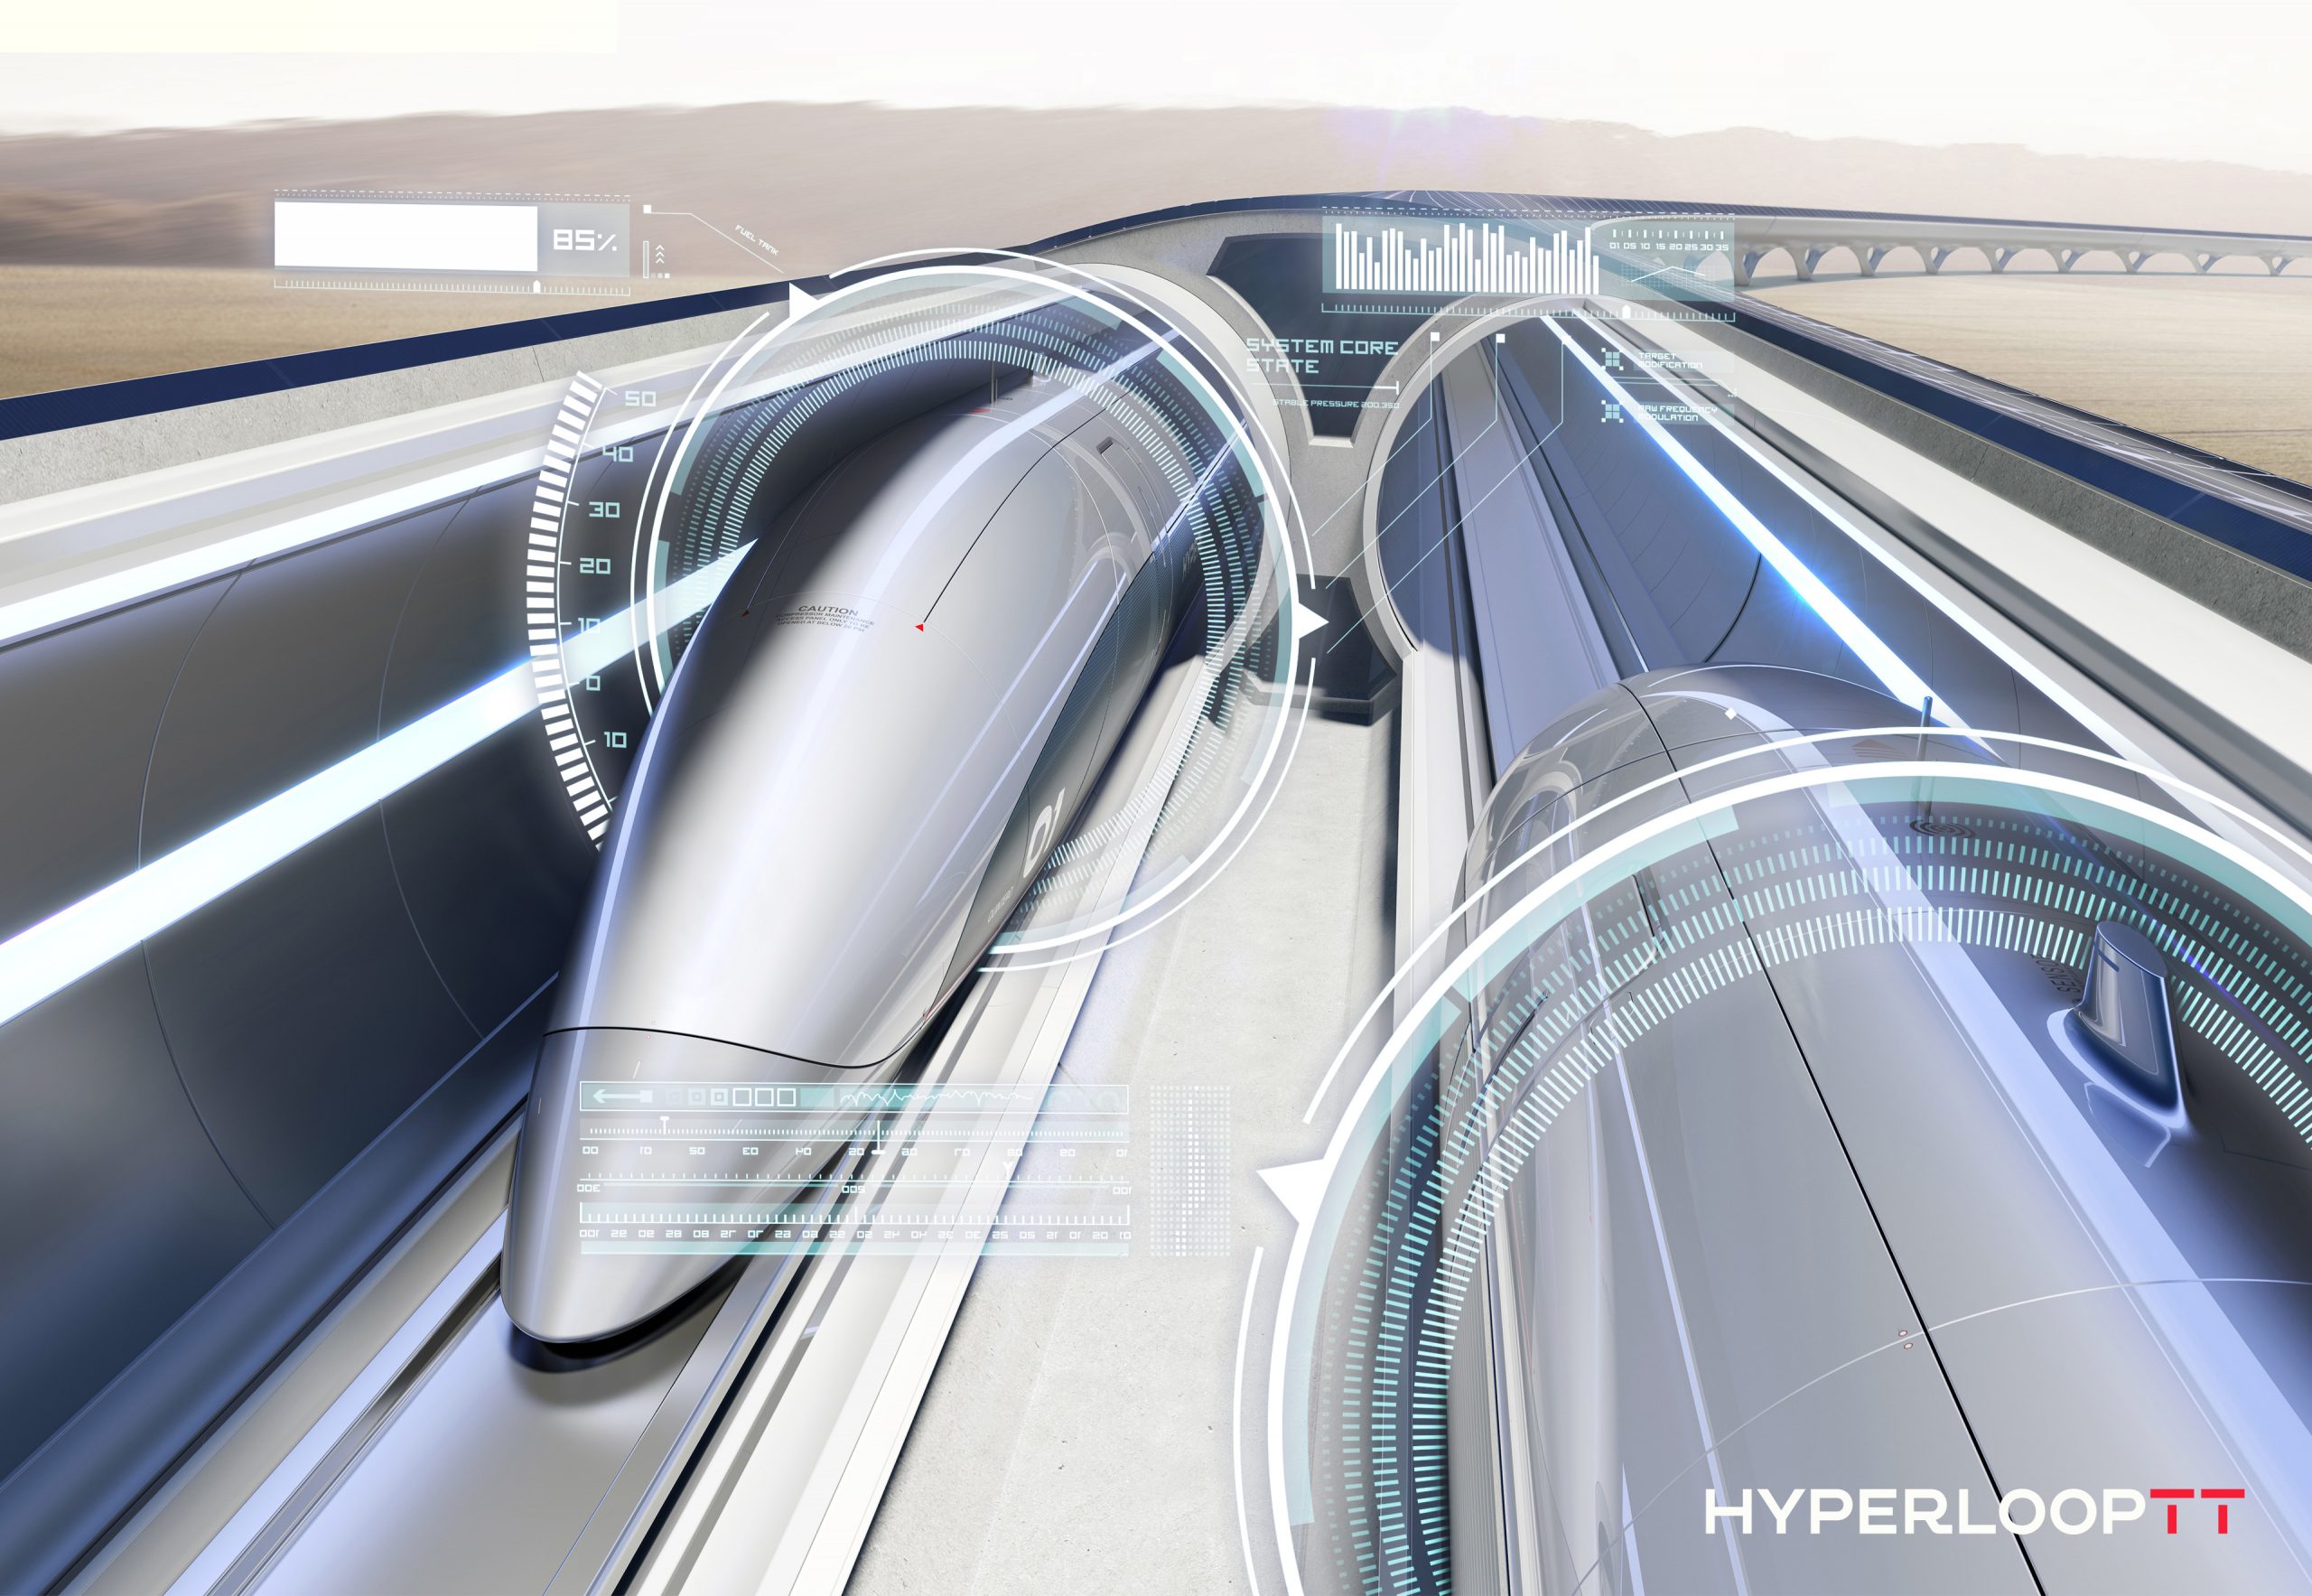 HyperloopTT takes crucial step to reality with Hitachi Rail